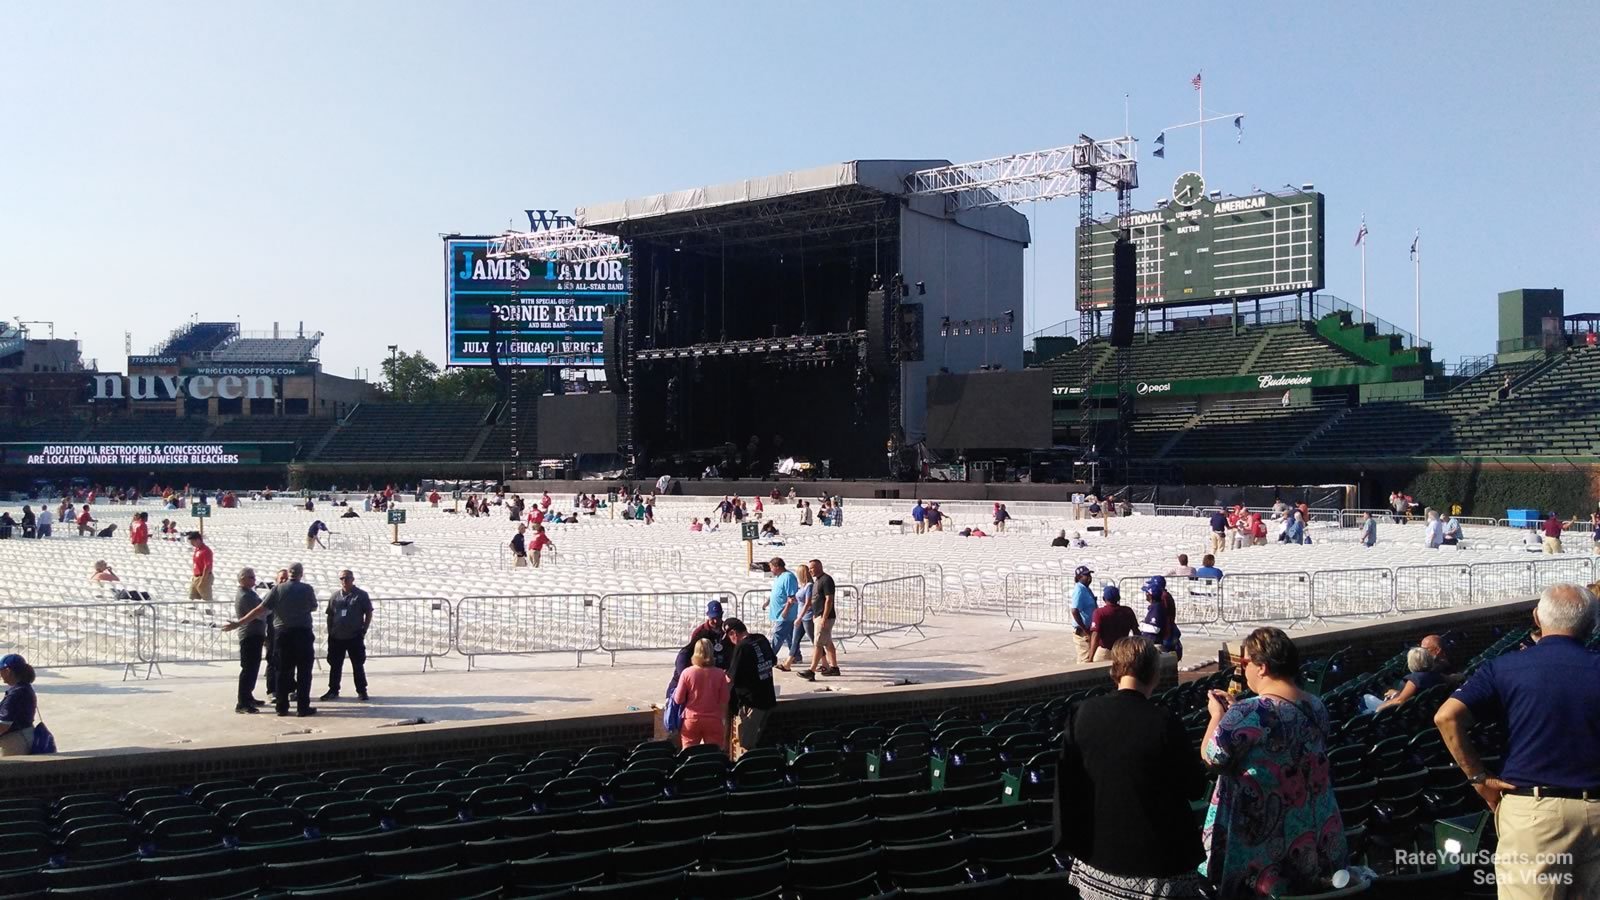 section 28, row 10 seat view  for concert - wrigley field